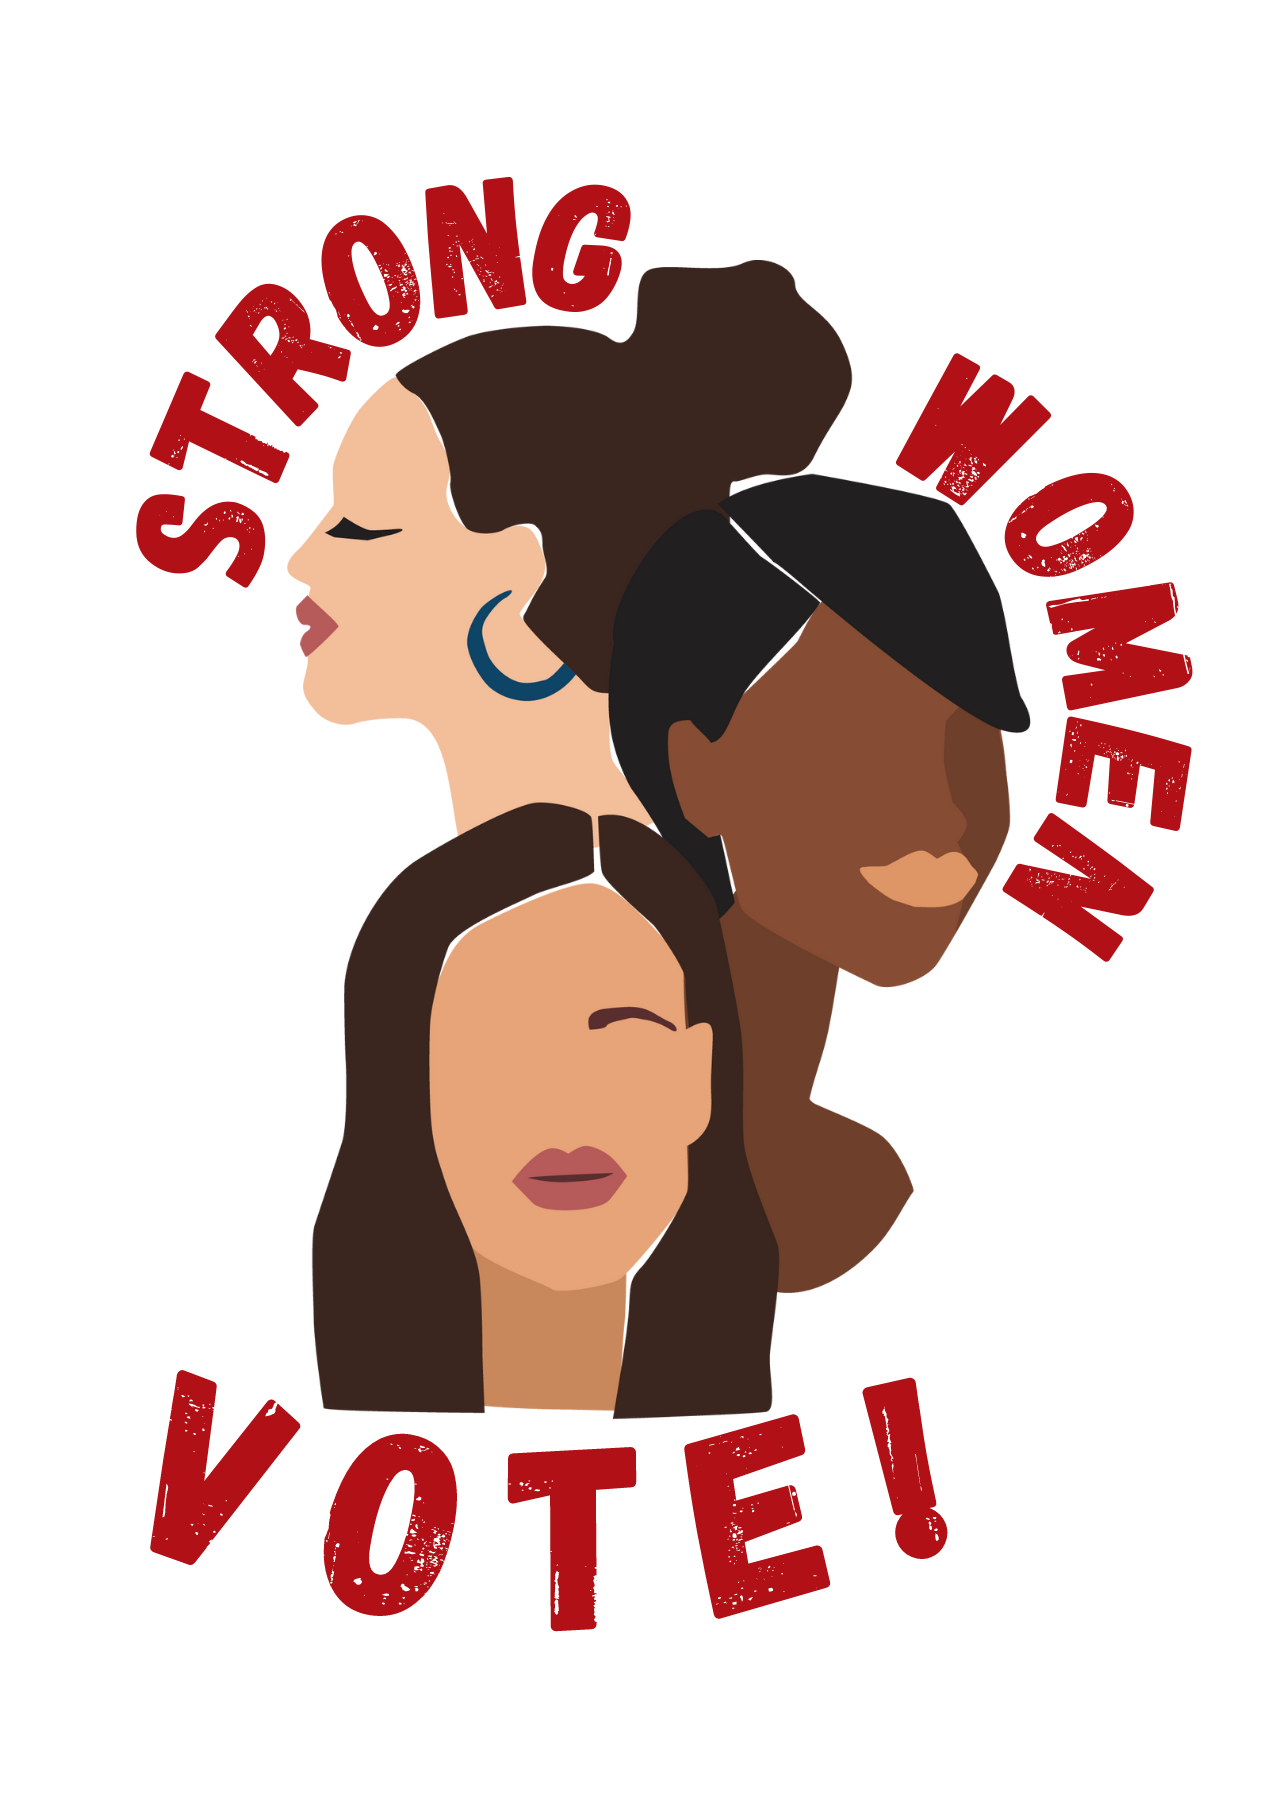 Illustrated women’s faces ordered in a triangle with phrase “strong women vote”